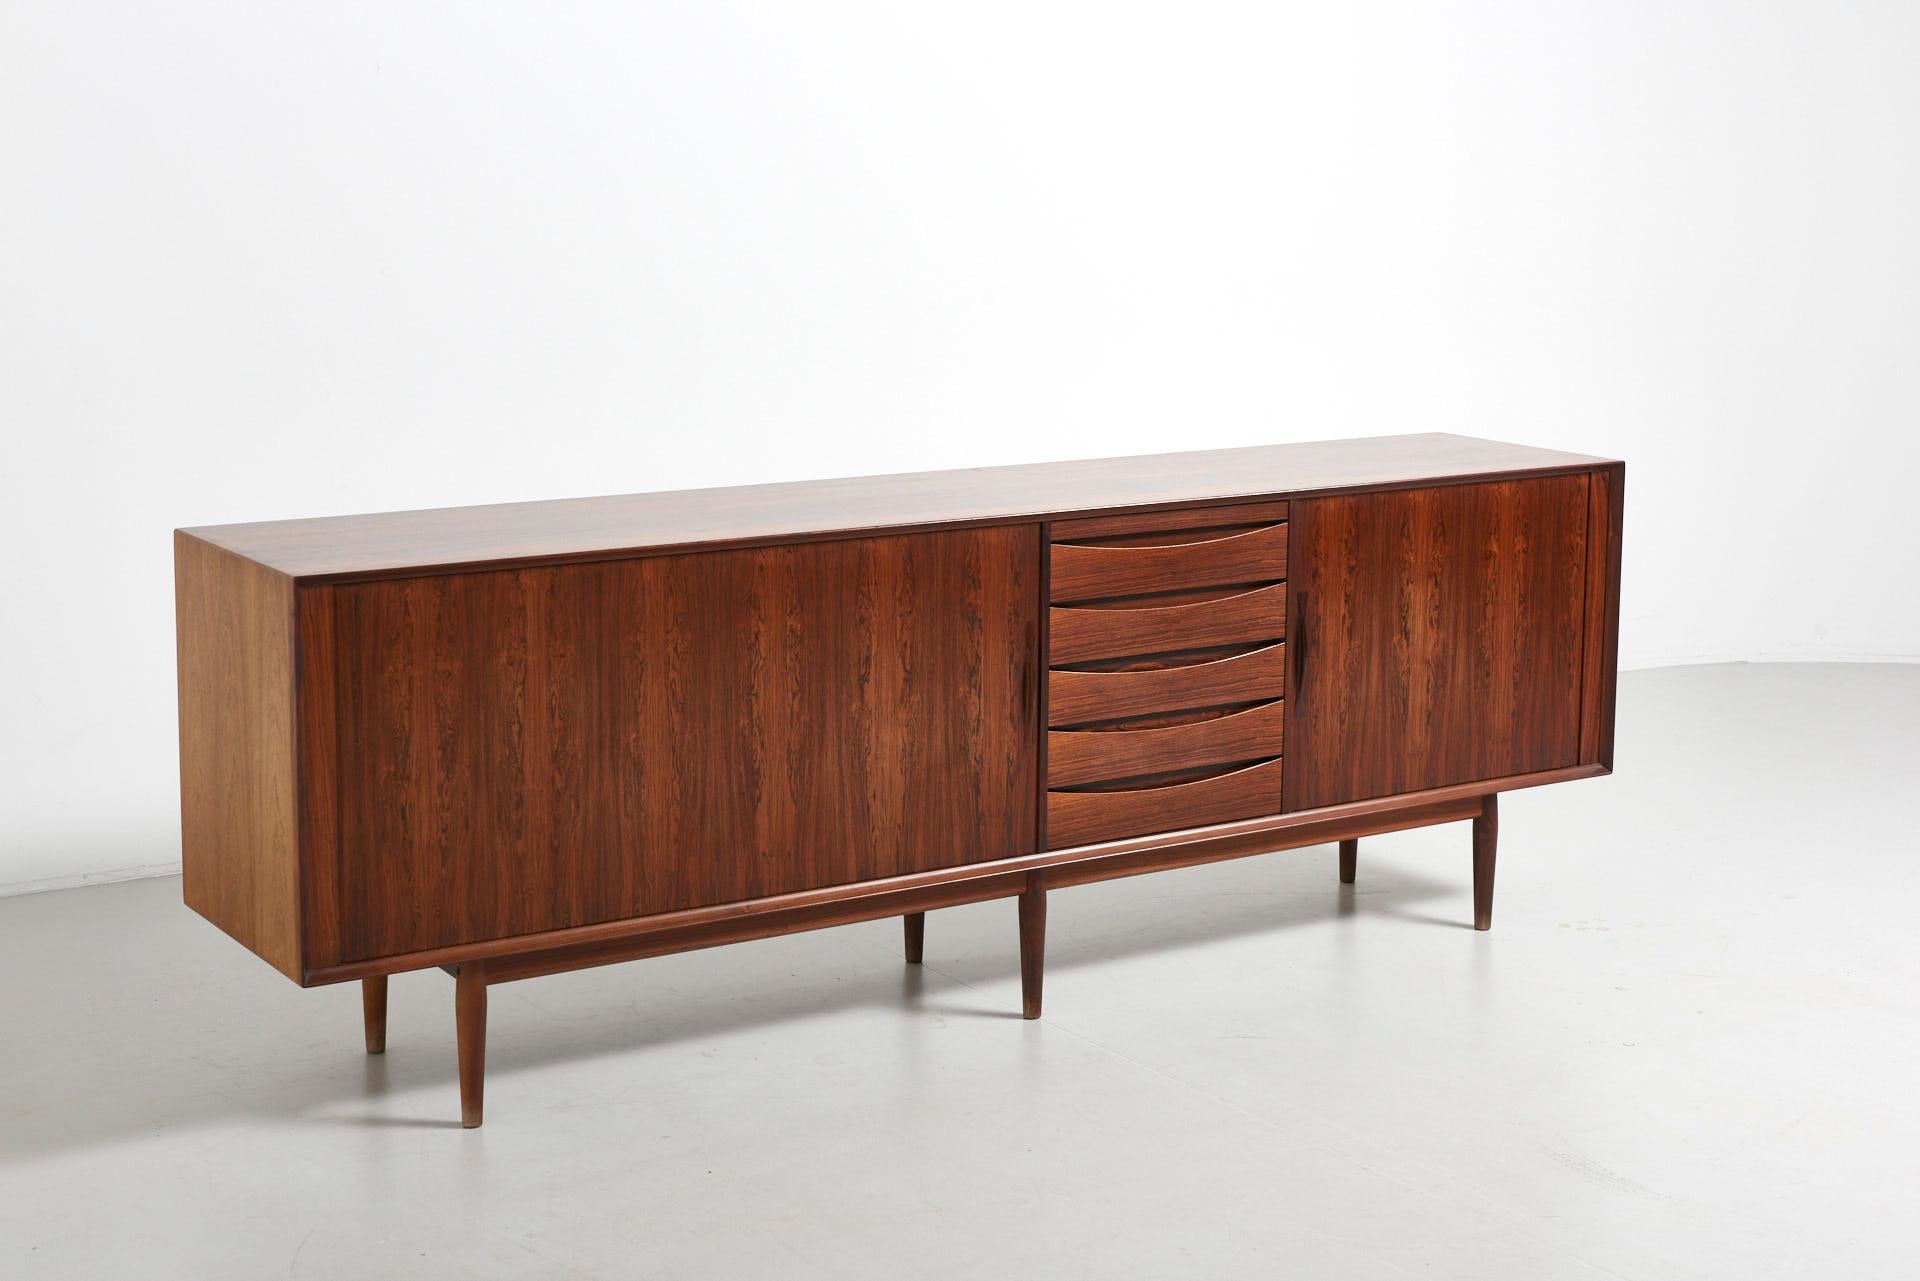 A rare sideboard, Model 76 designed by Arne Vodder in the 1950s. It features tambour doors, drawers and a tray in black leather. In a very good condition, with normal traces of use and one side slightly faded through sunlight. Made by Sibast